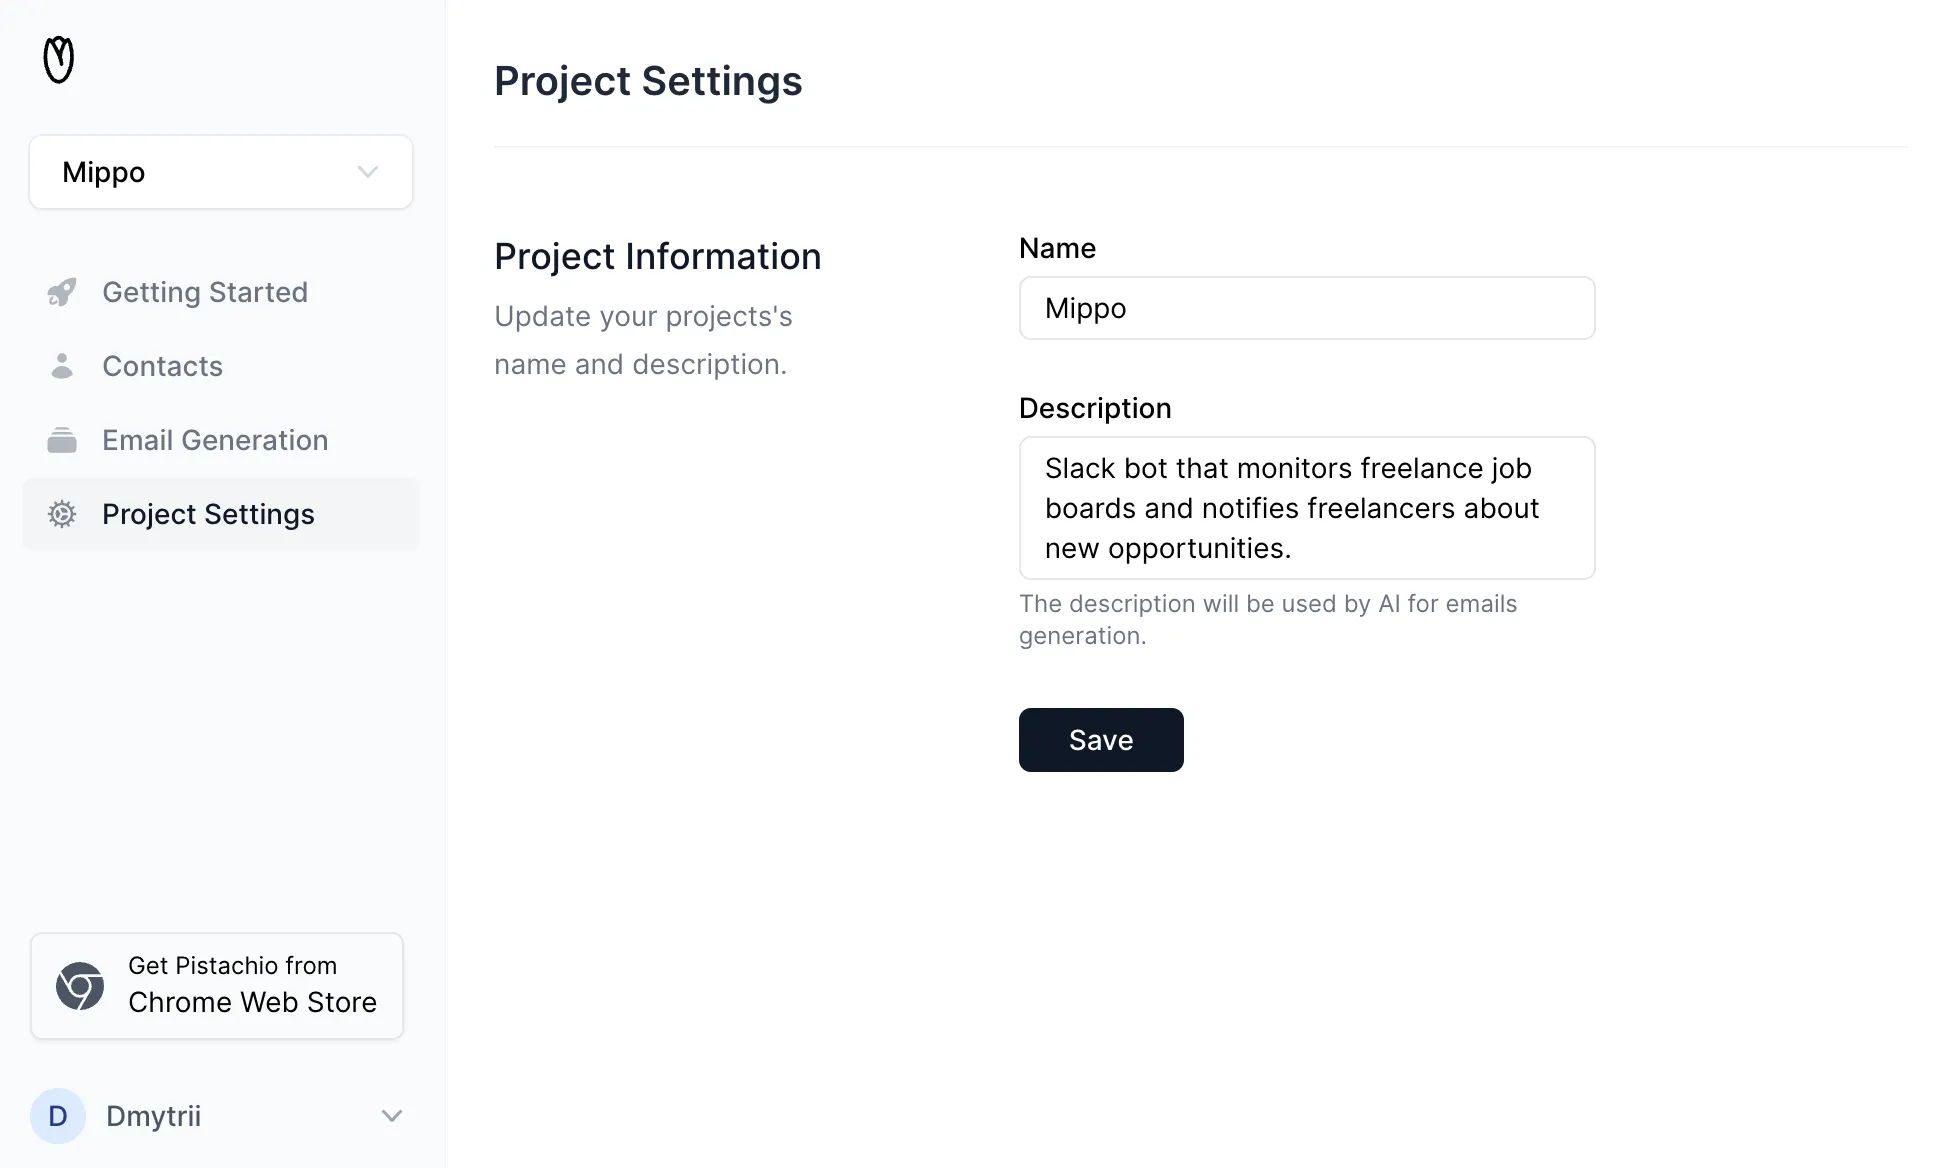 Organize contacts in projects